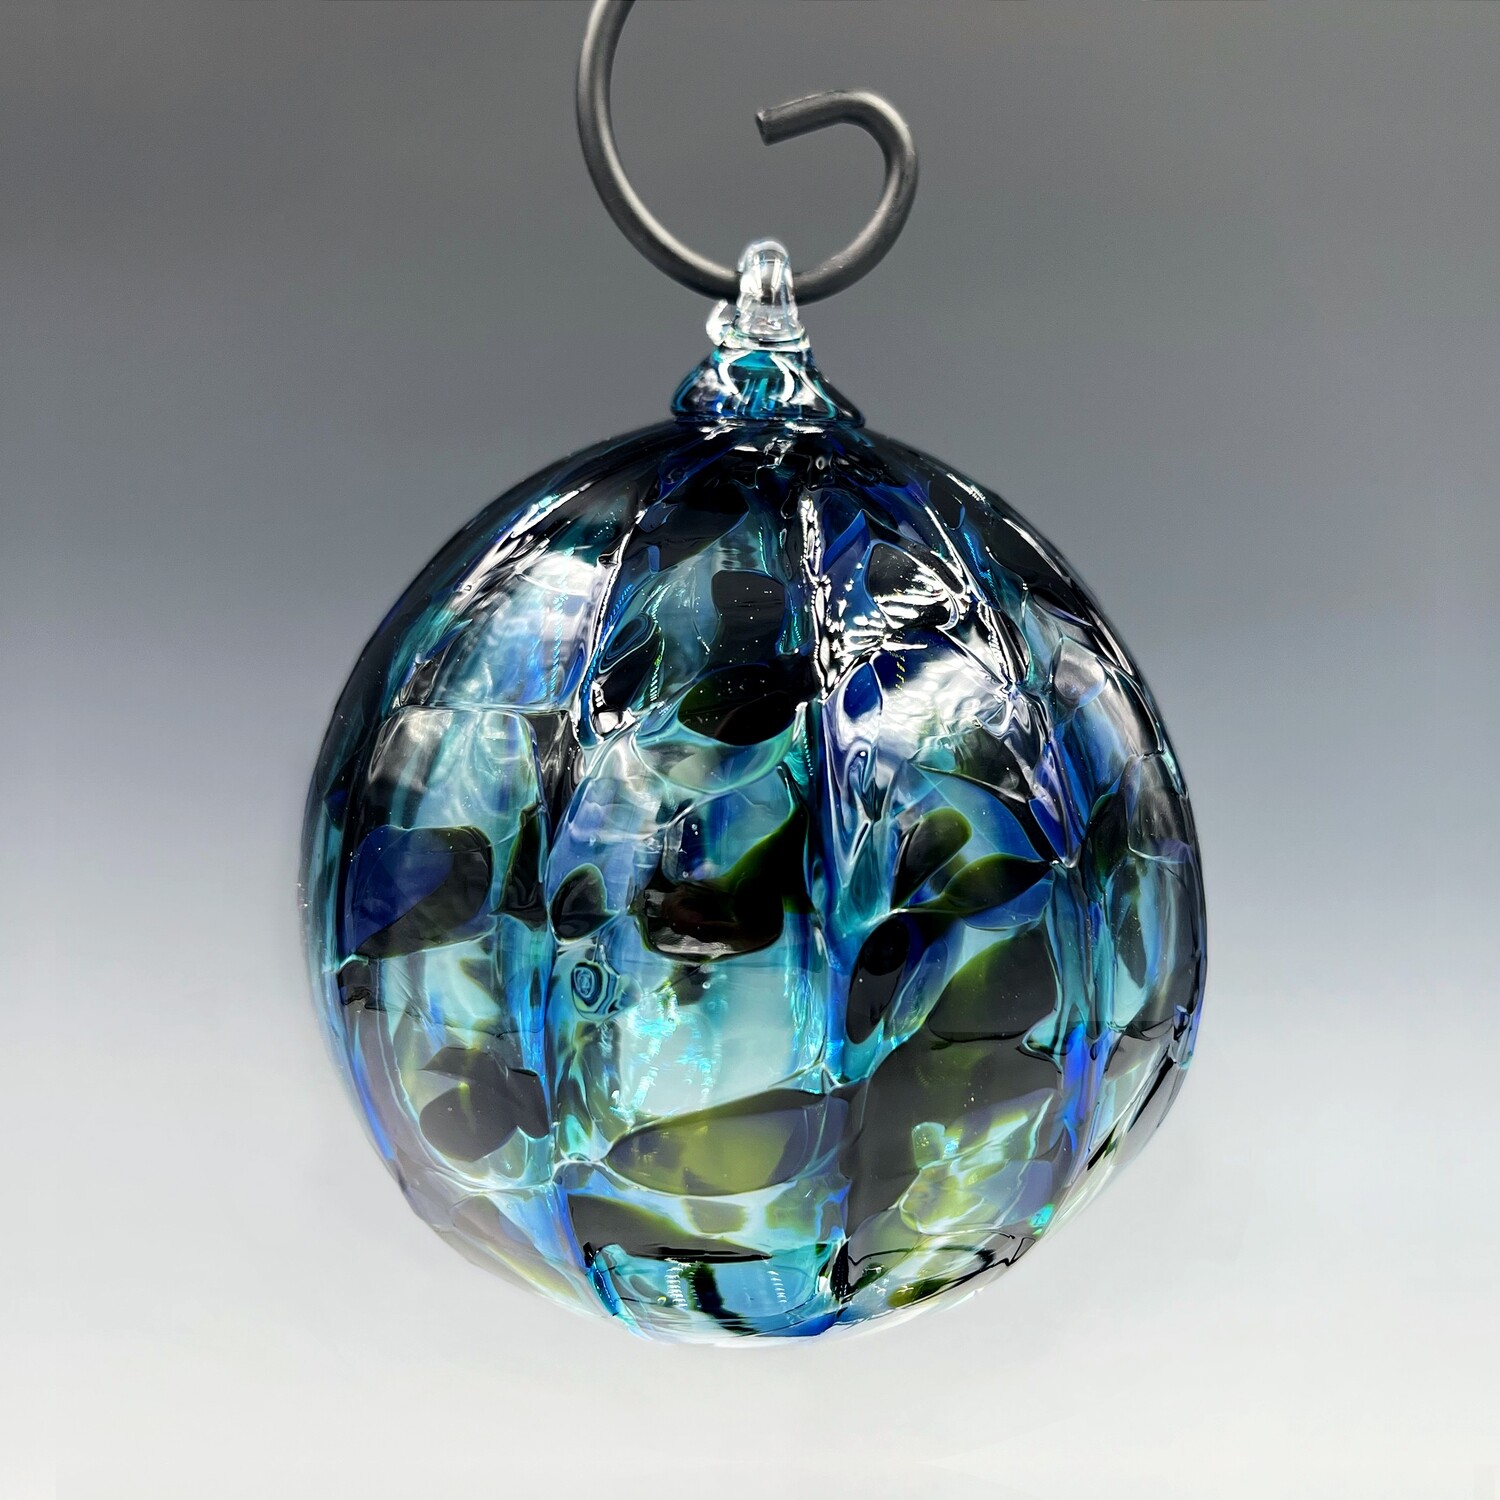 Glass Ornament in Blue-Green Mix